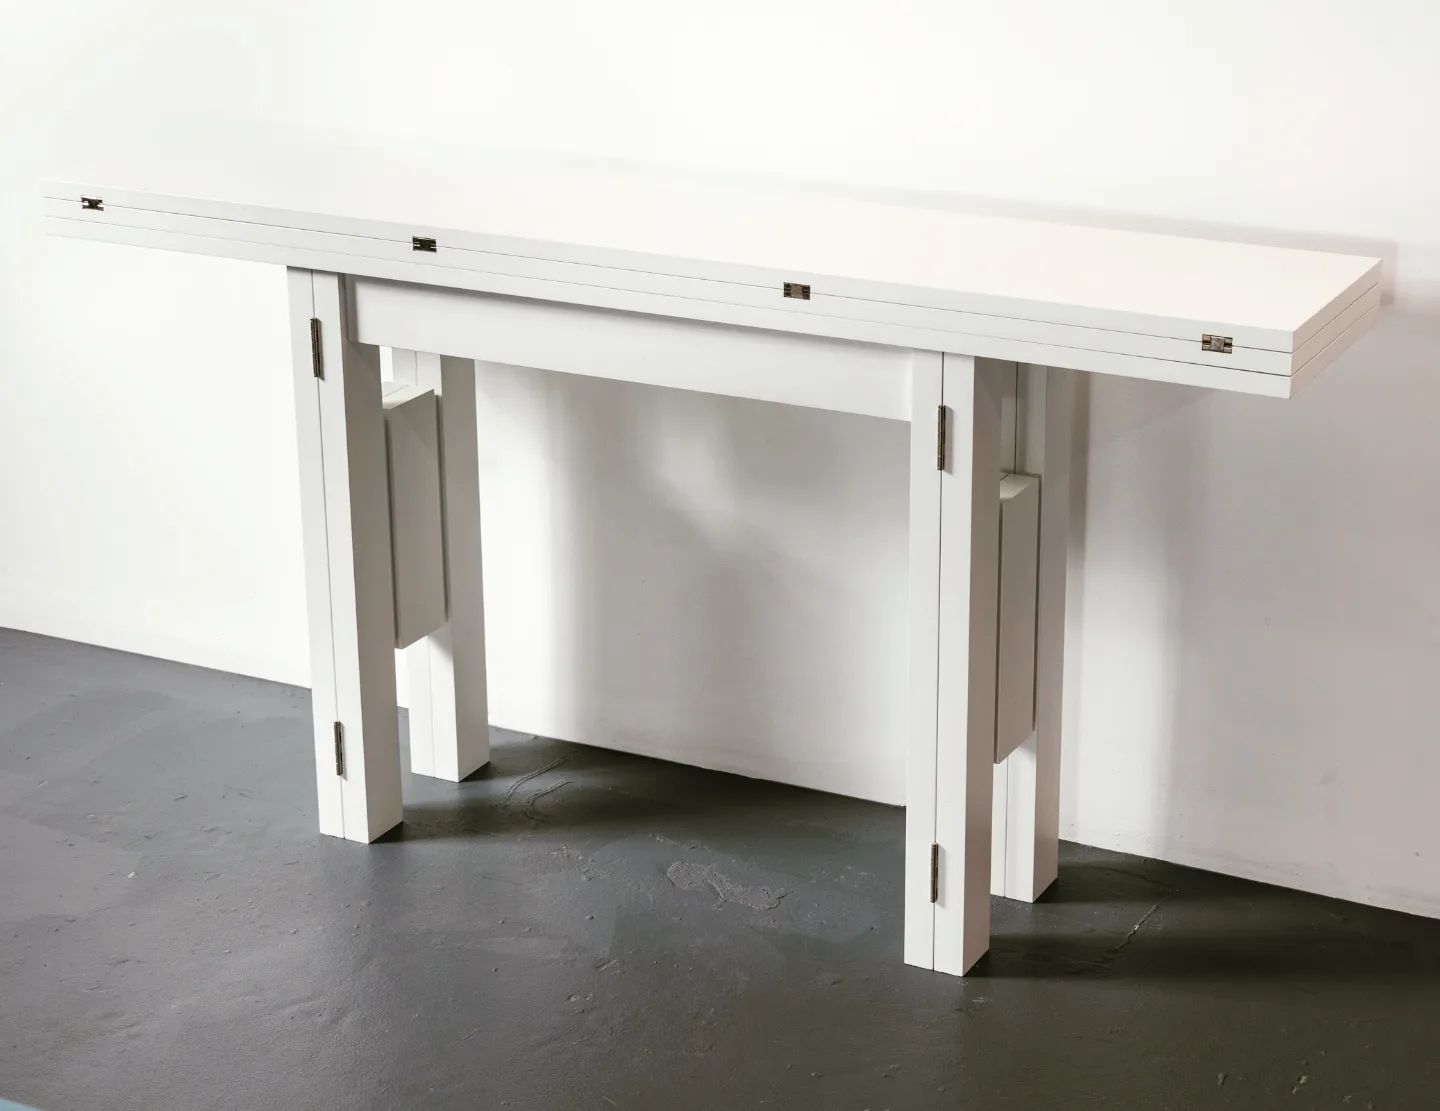 One of our Transformer tables - 60" in a white lacquer finish. Expands laterally from console to dining table, and great for city apartments. This piece is for sale at a 50% discount. "Floor model" 

#transformers #diningtable #consoletable #convertible #table #modernfurniture #modernhome #citylife #homedecor #interiors #interiordesignideas #designinspo #interiorinspo #designlife